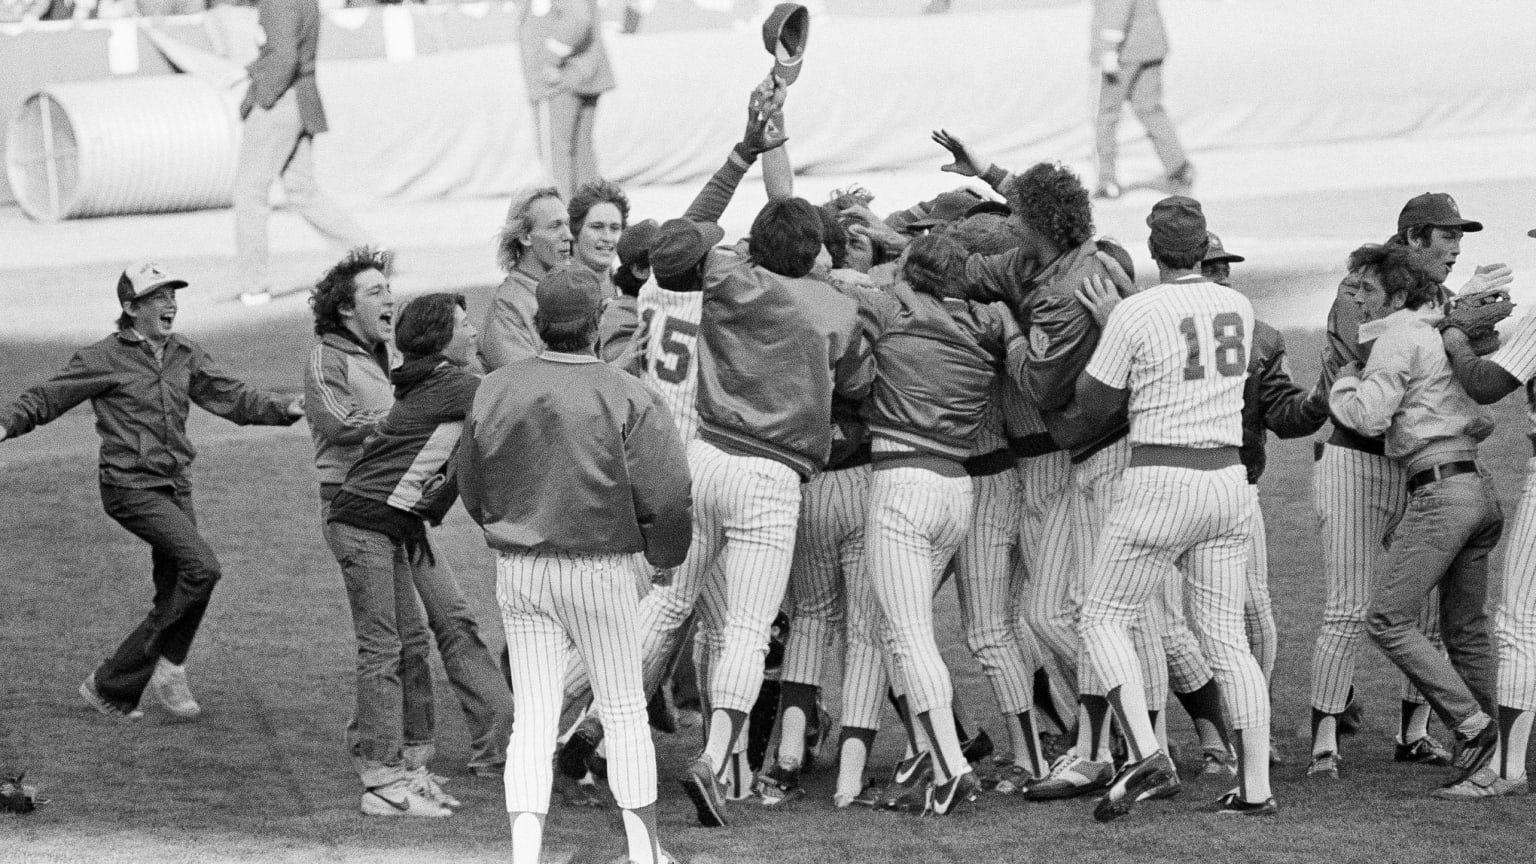 Jubilant moment of victory or celebration, showing a group of baseball players in striped uniforms, likely from an earlier era, enthusiastically huddled together on the field.